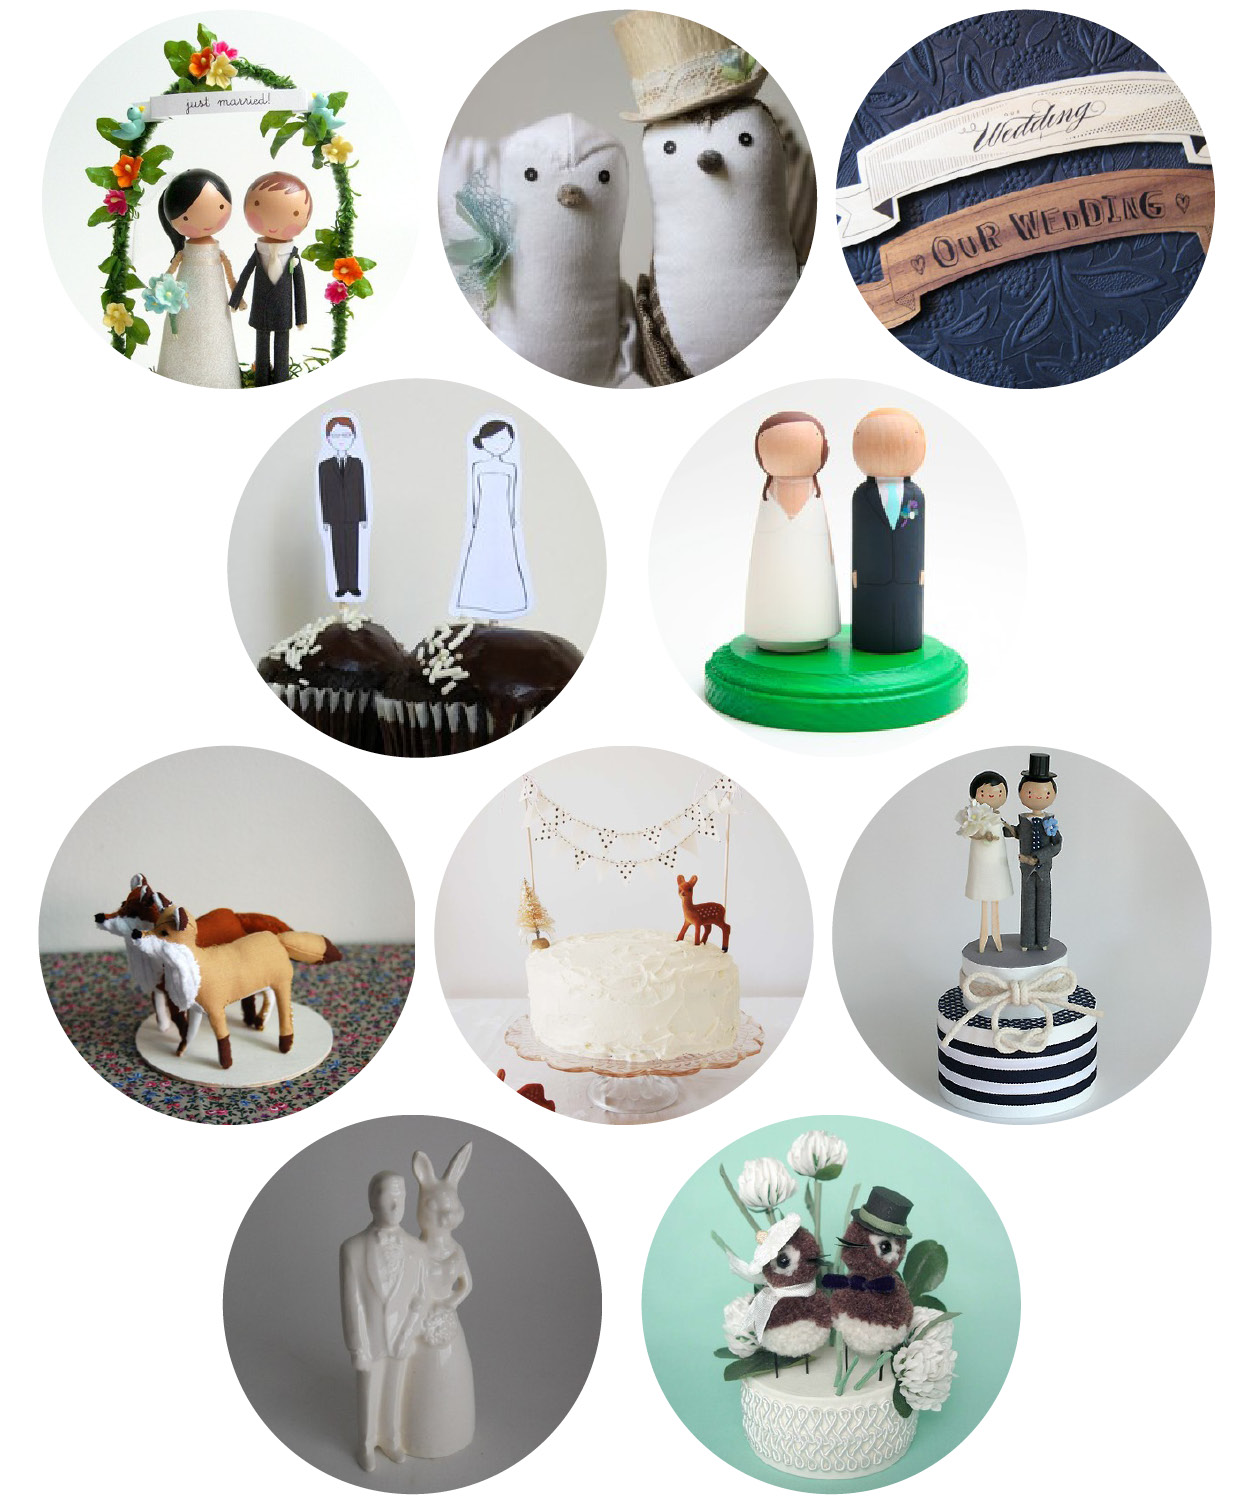 Top 10: Cake toppers [+giveaway]